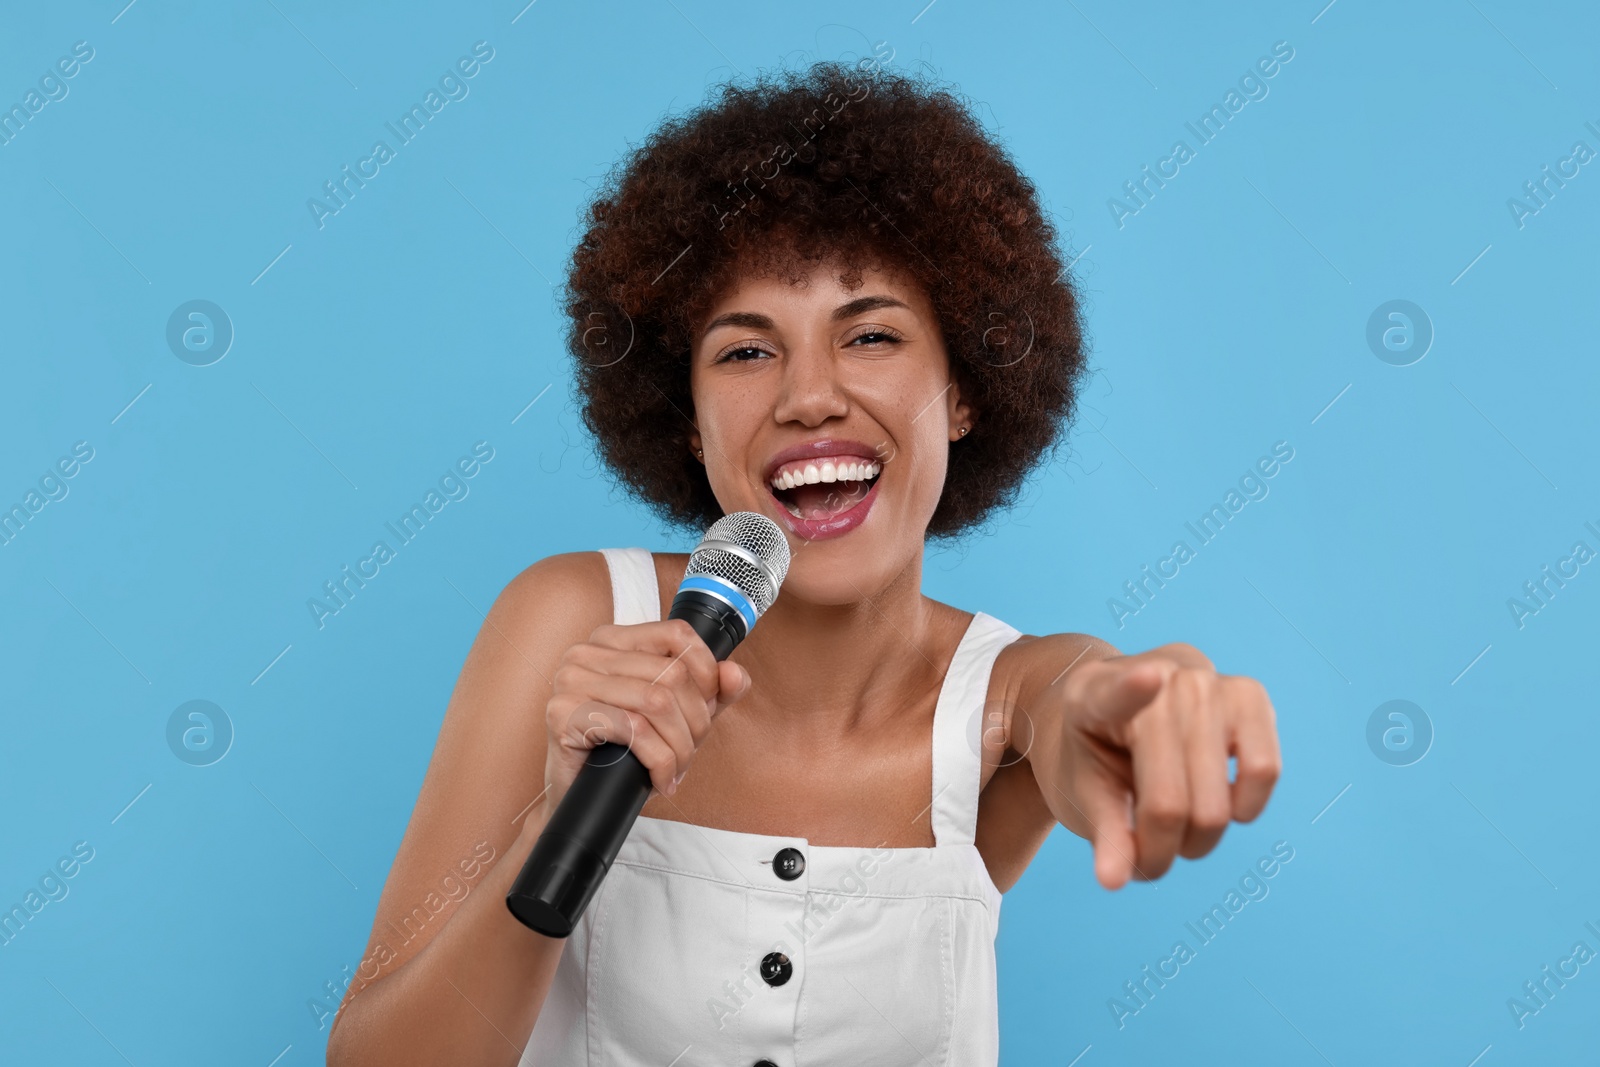 Photo of Curly young woman with microphone singing on light blue background